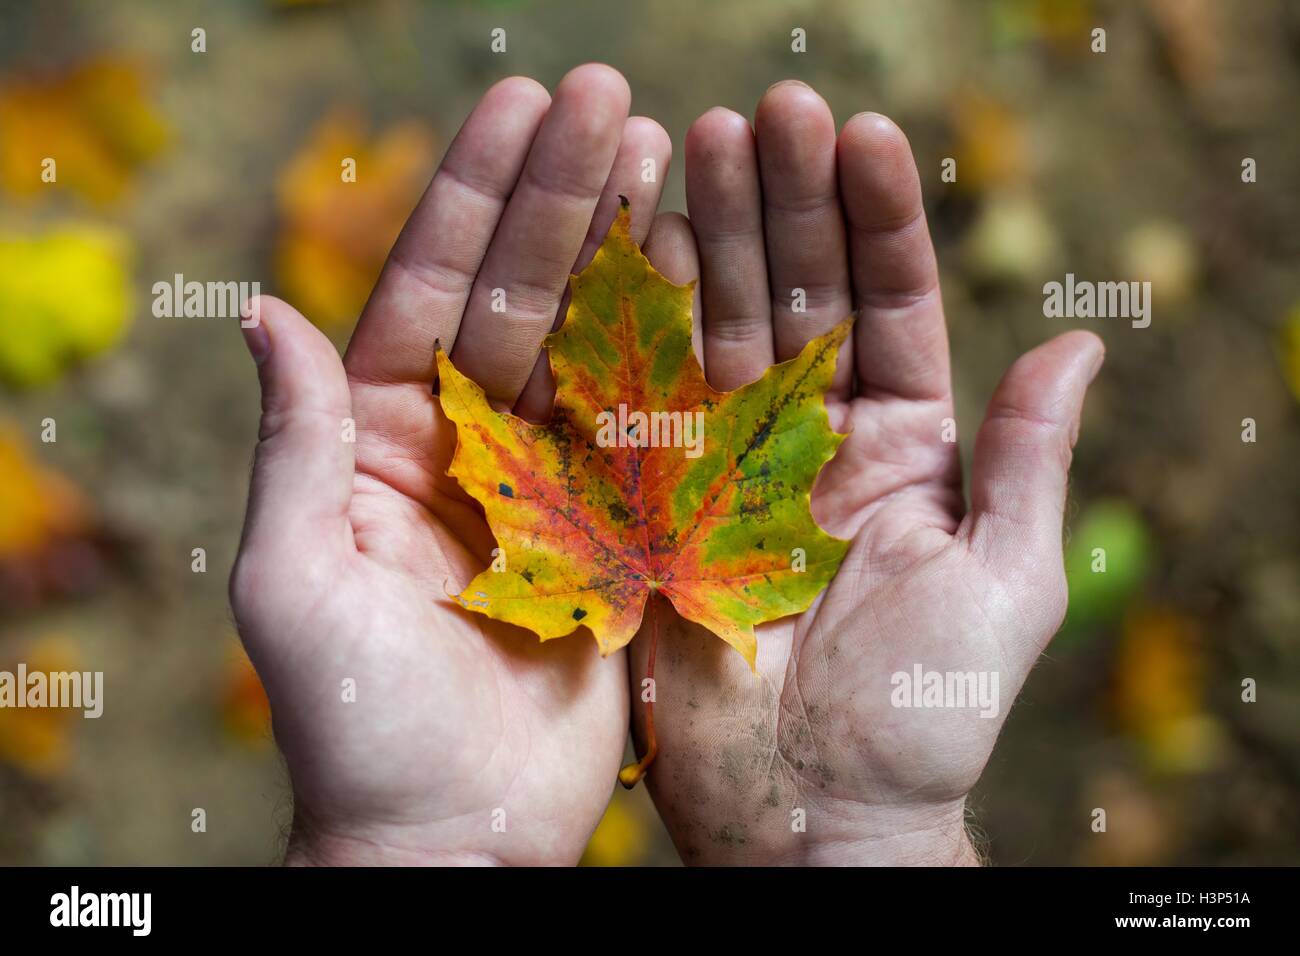 Changing season in hands Stock Photo